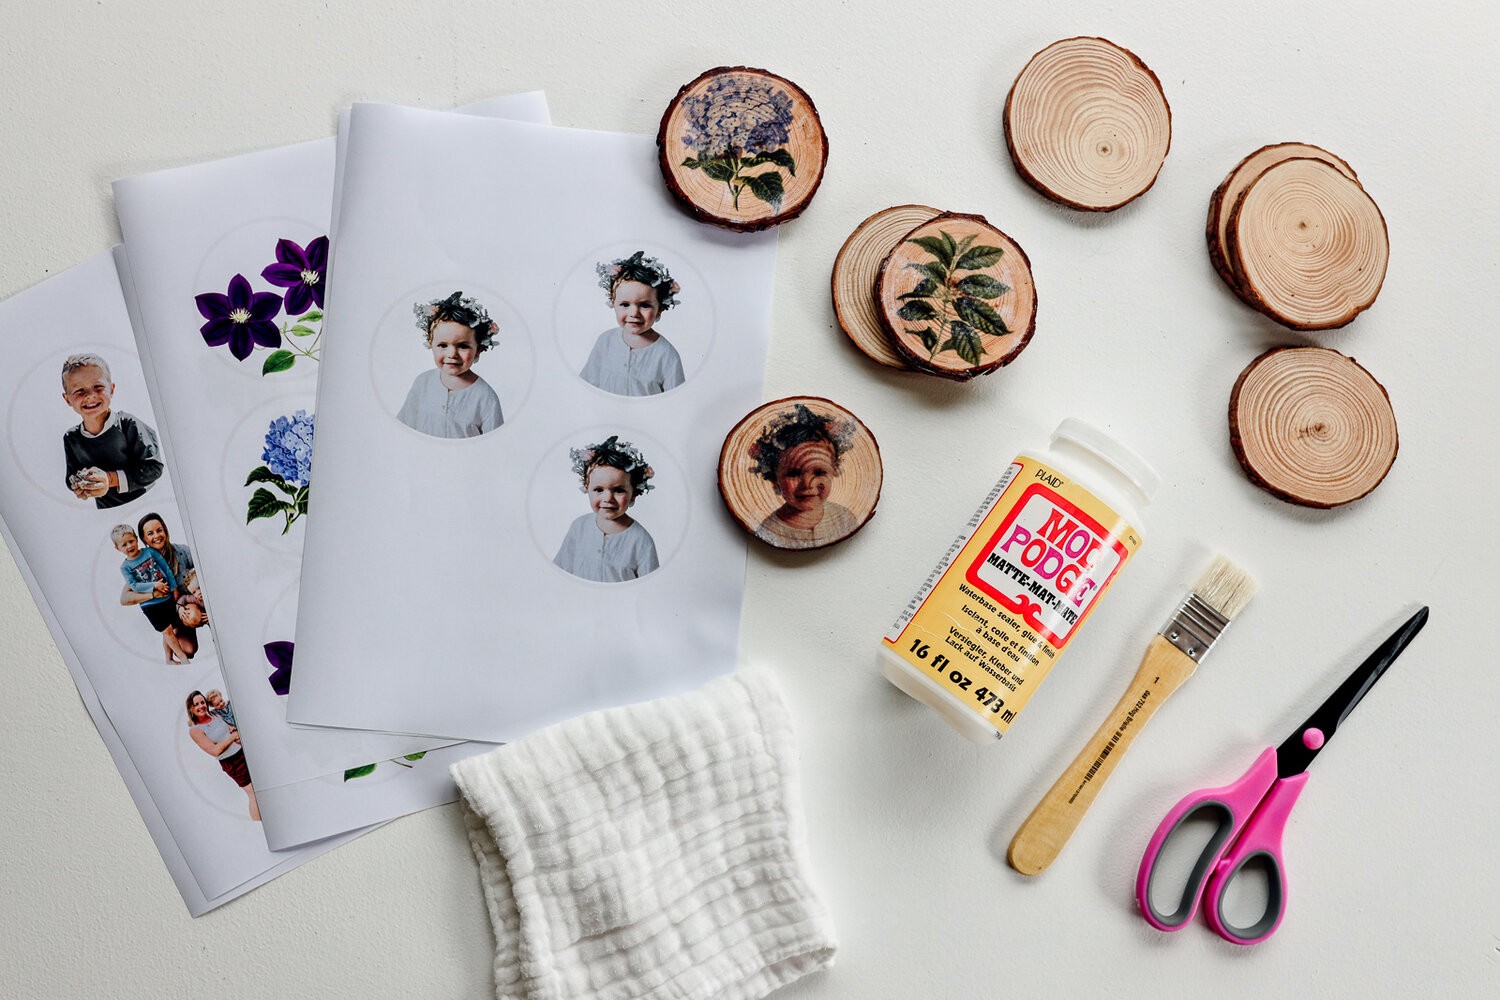 Supplies are lying on a table - printed photos, wood, Mod Podge, brush, scissors, and cloth.